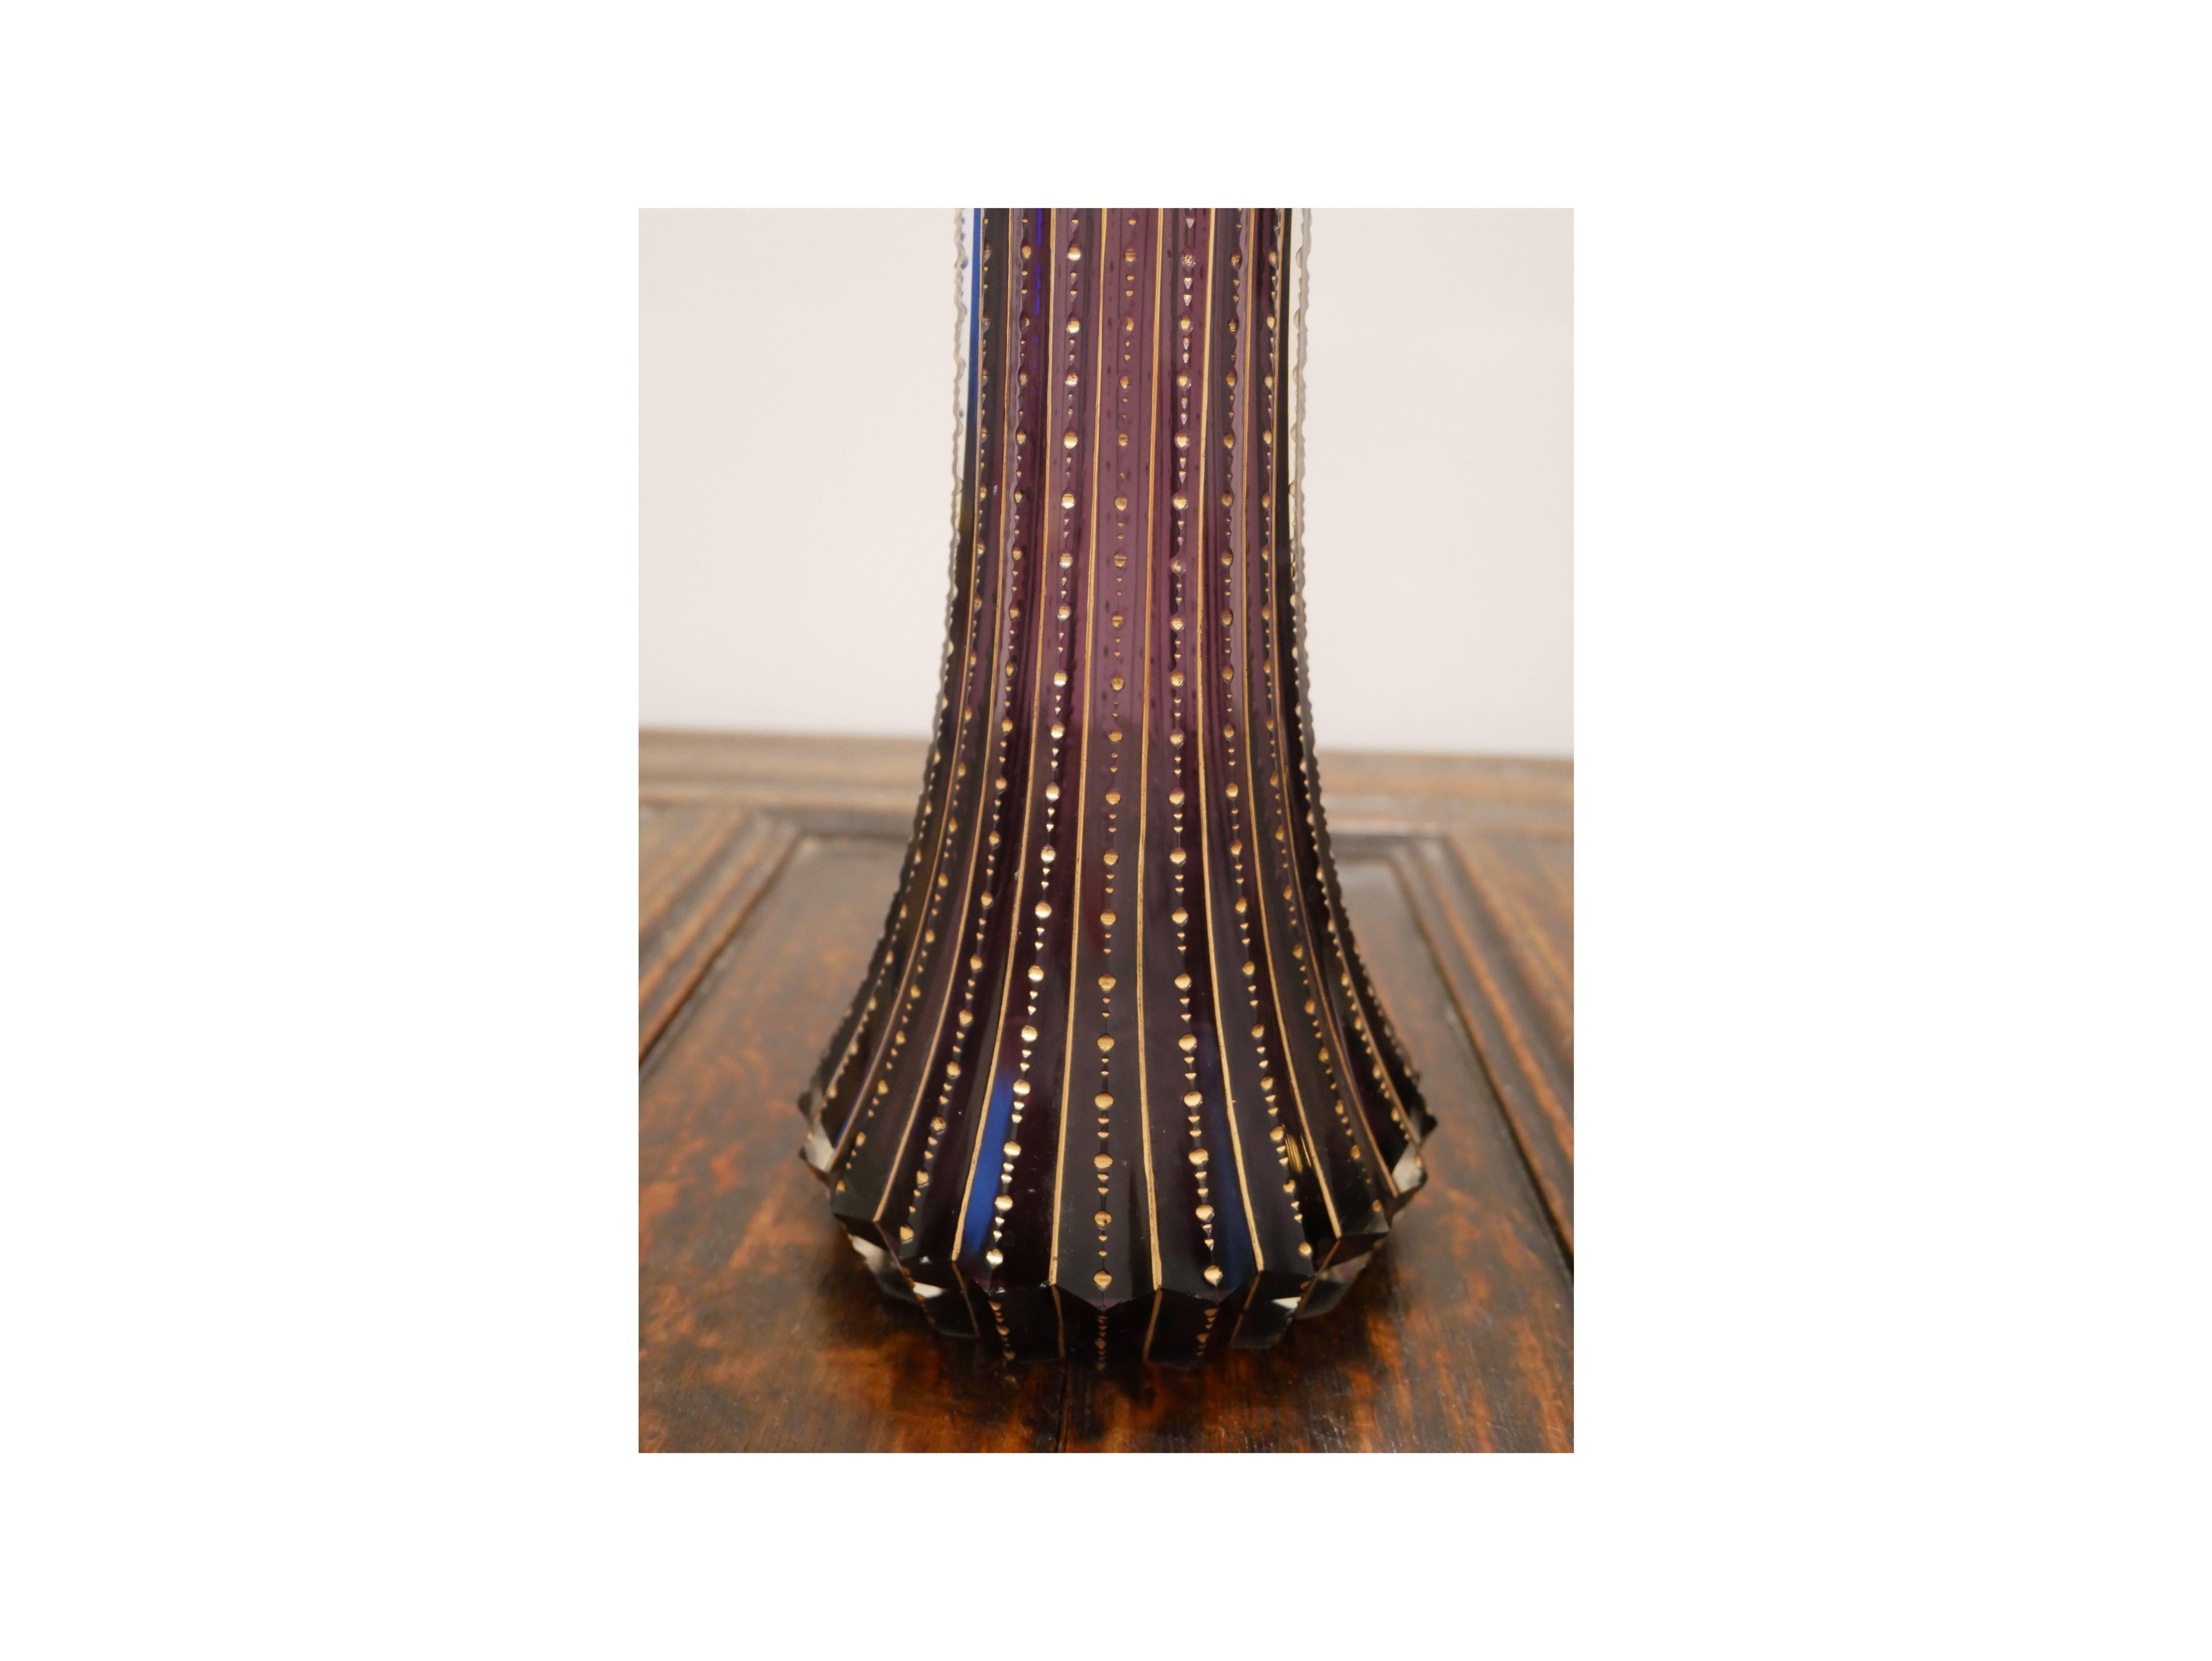 Gilt Pair of Early 20th Century Bohemian Amethyst Glass Vases Attributed to Moser